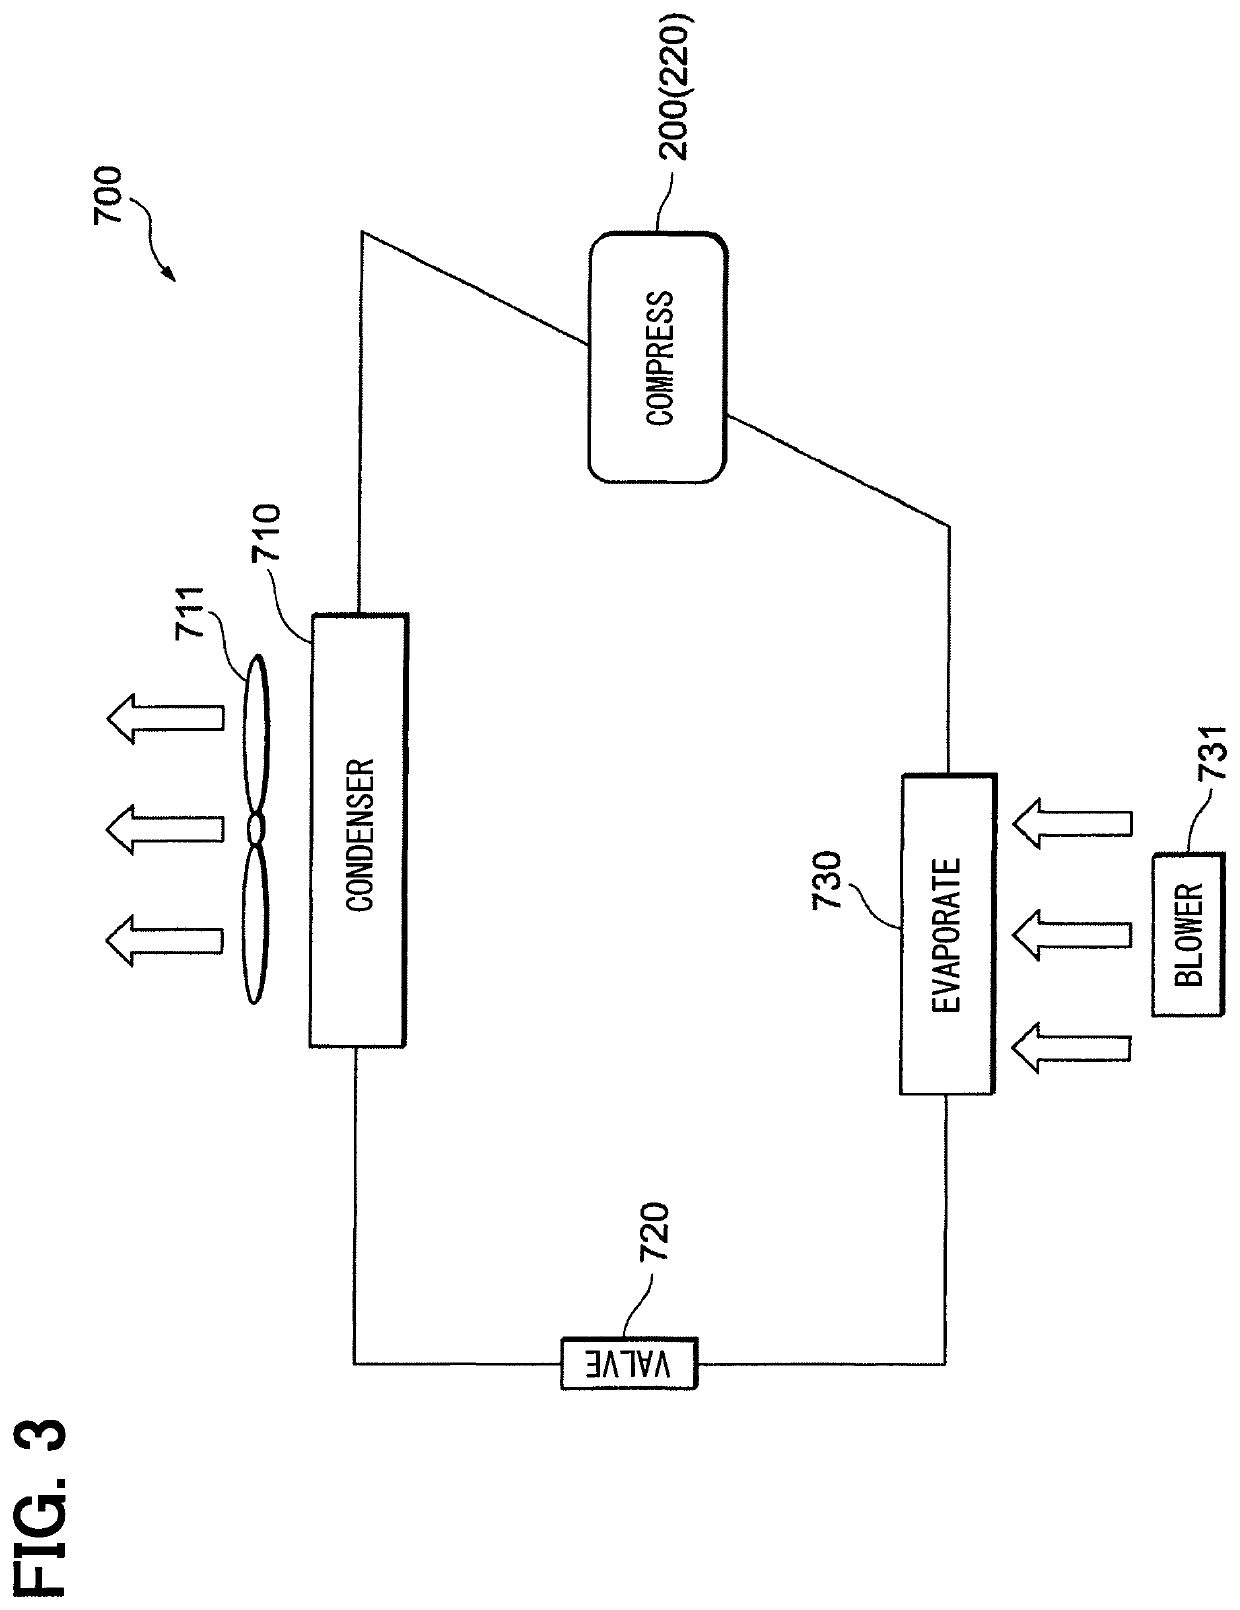 Power control system for electric vehicle